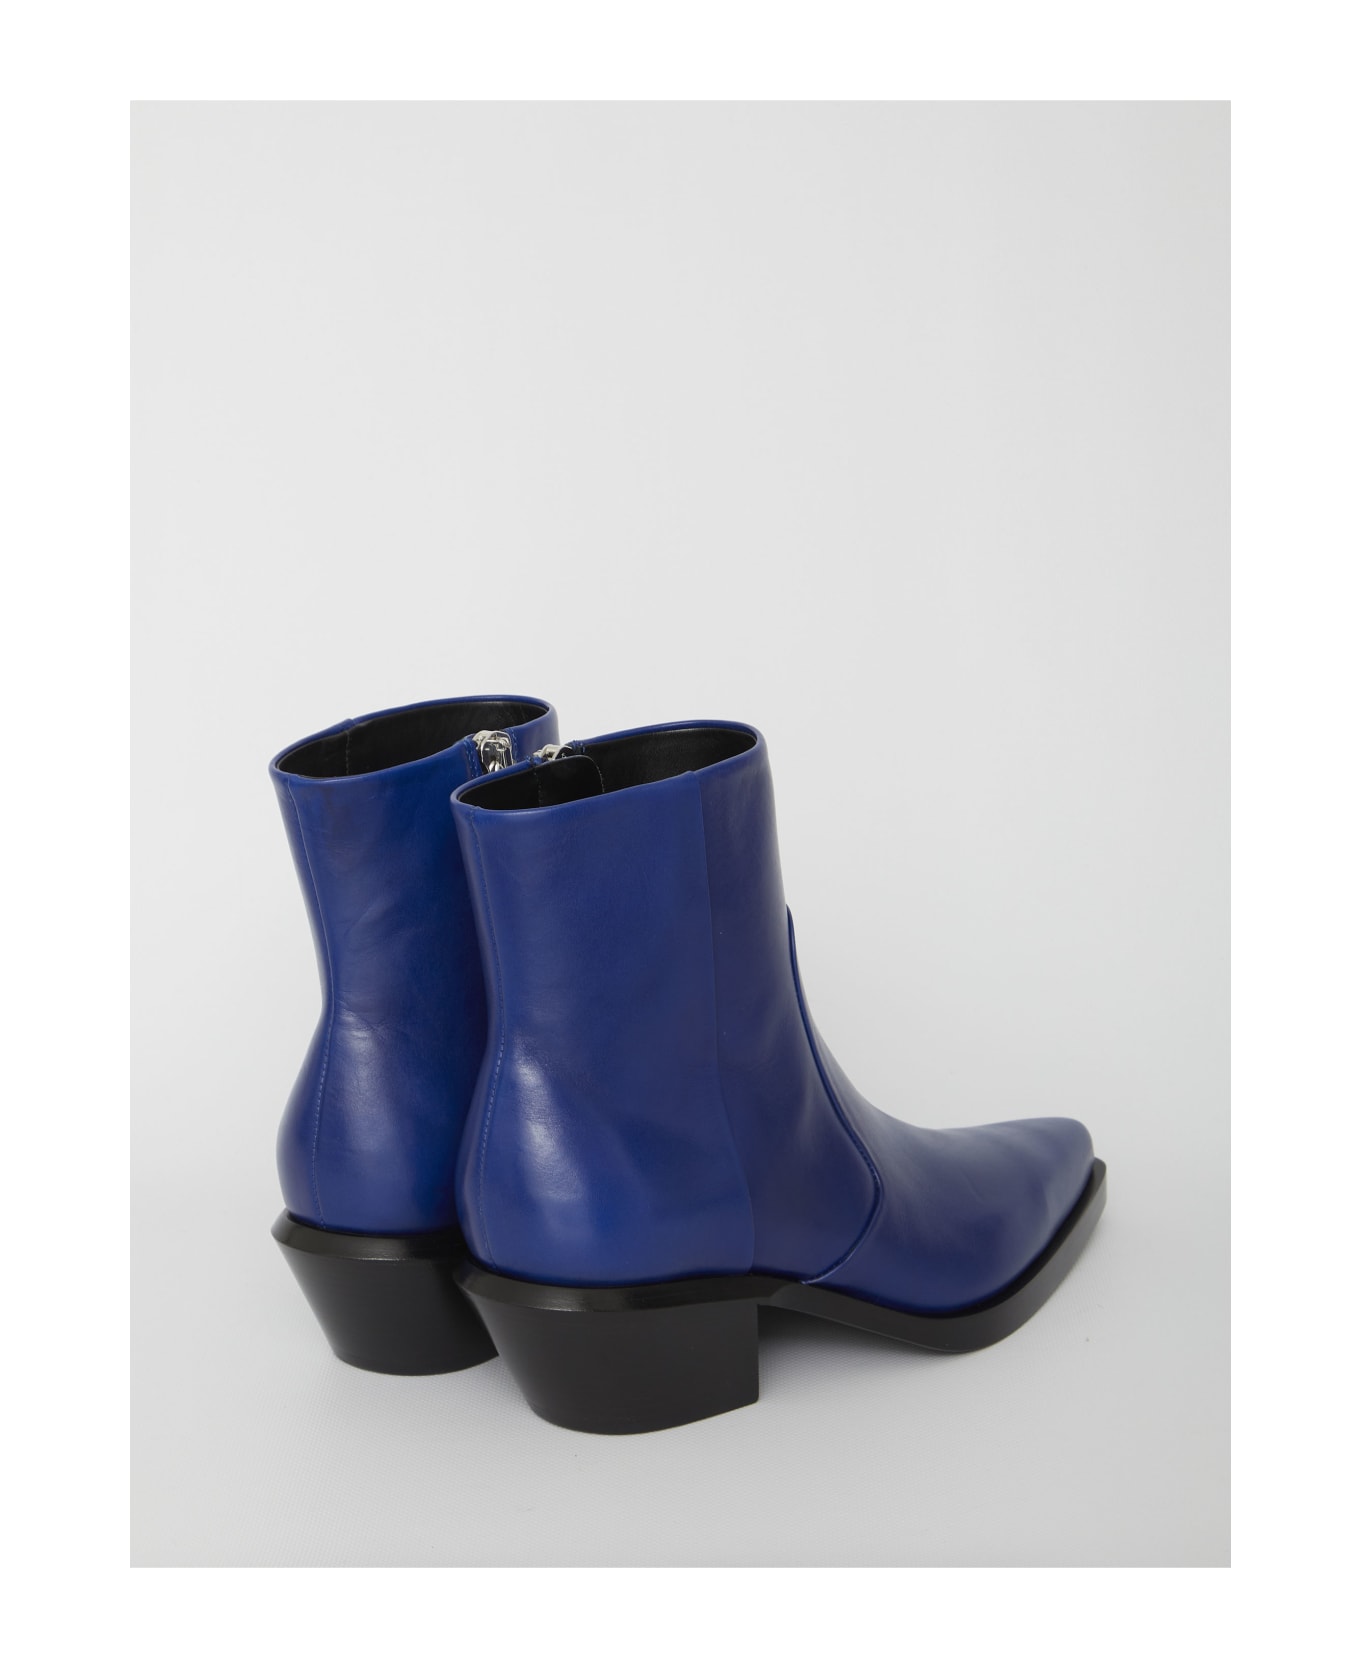 Off-White Slim Texan Ankle Boots - BLUE